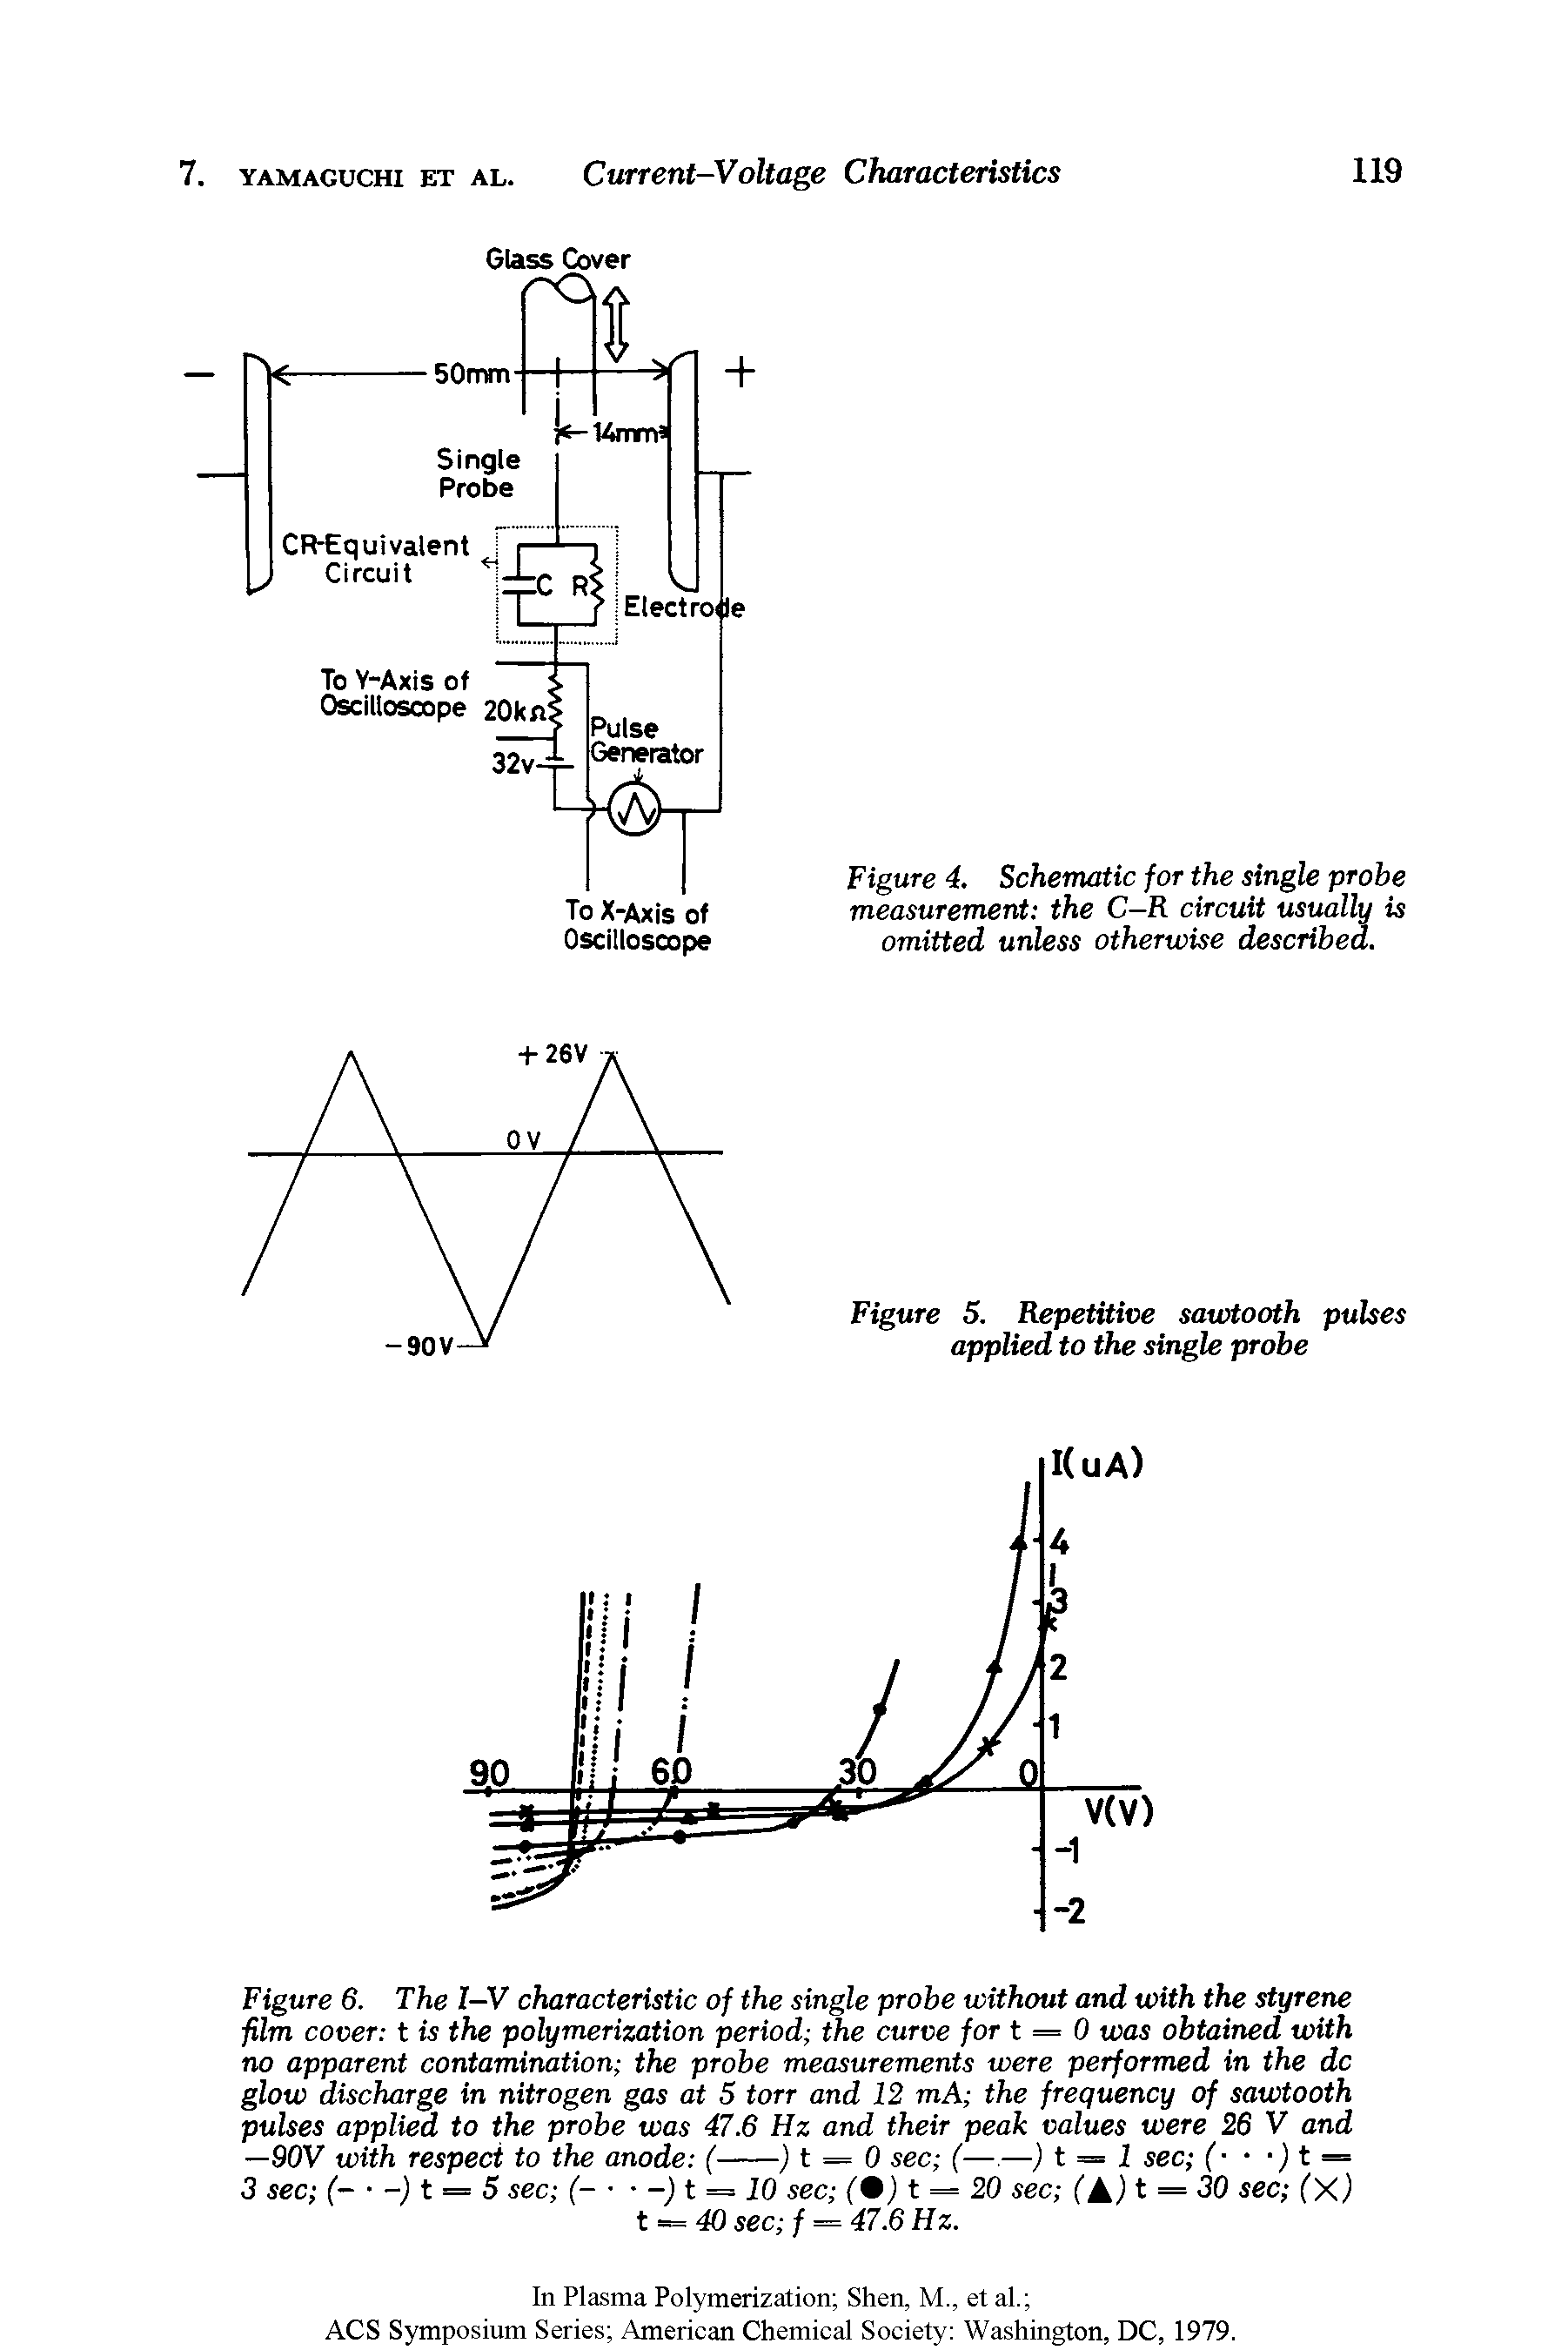 Figure 6. The I—V characteristic of the single probe without and with the styrene film cover t is the polymerization period the curve fort = 0 was obtained with no apparent contamination the probe measurements were performed in the dc glow discharge in nitrogen gas at 5 torr and 12 mA the frequency of sawtooth pulses applied to the probe was 47.6 Hz and their peak values were 26 V and...